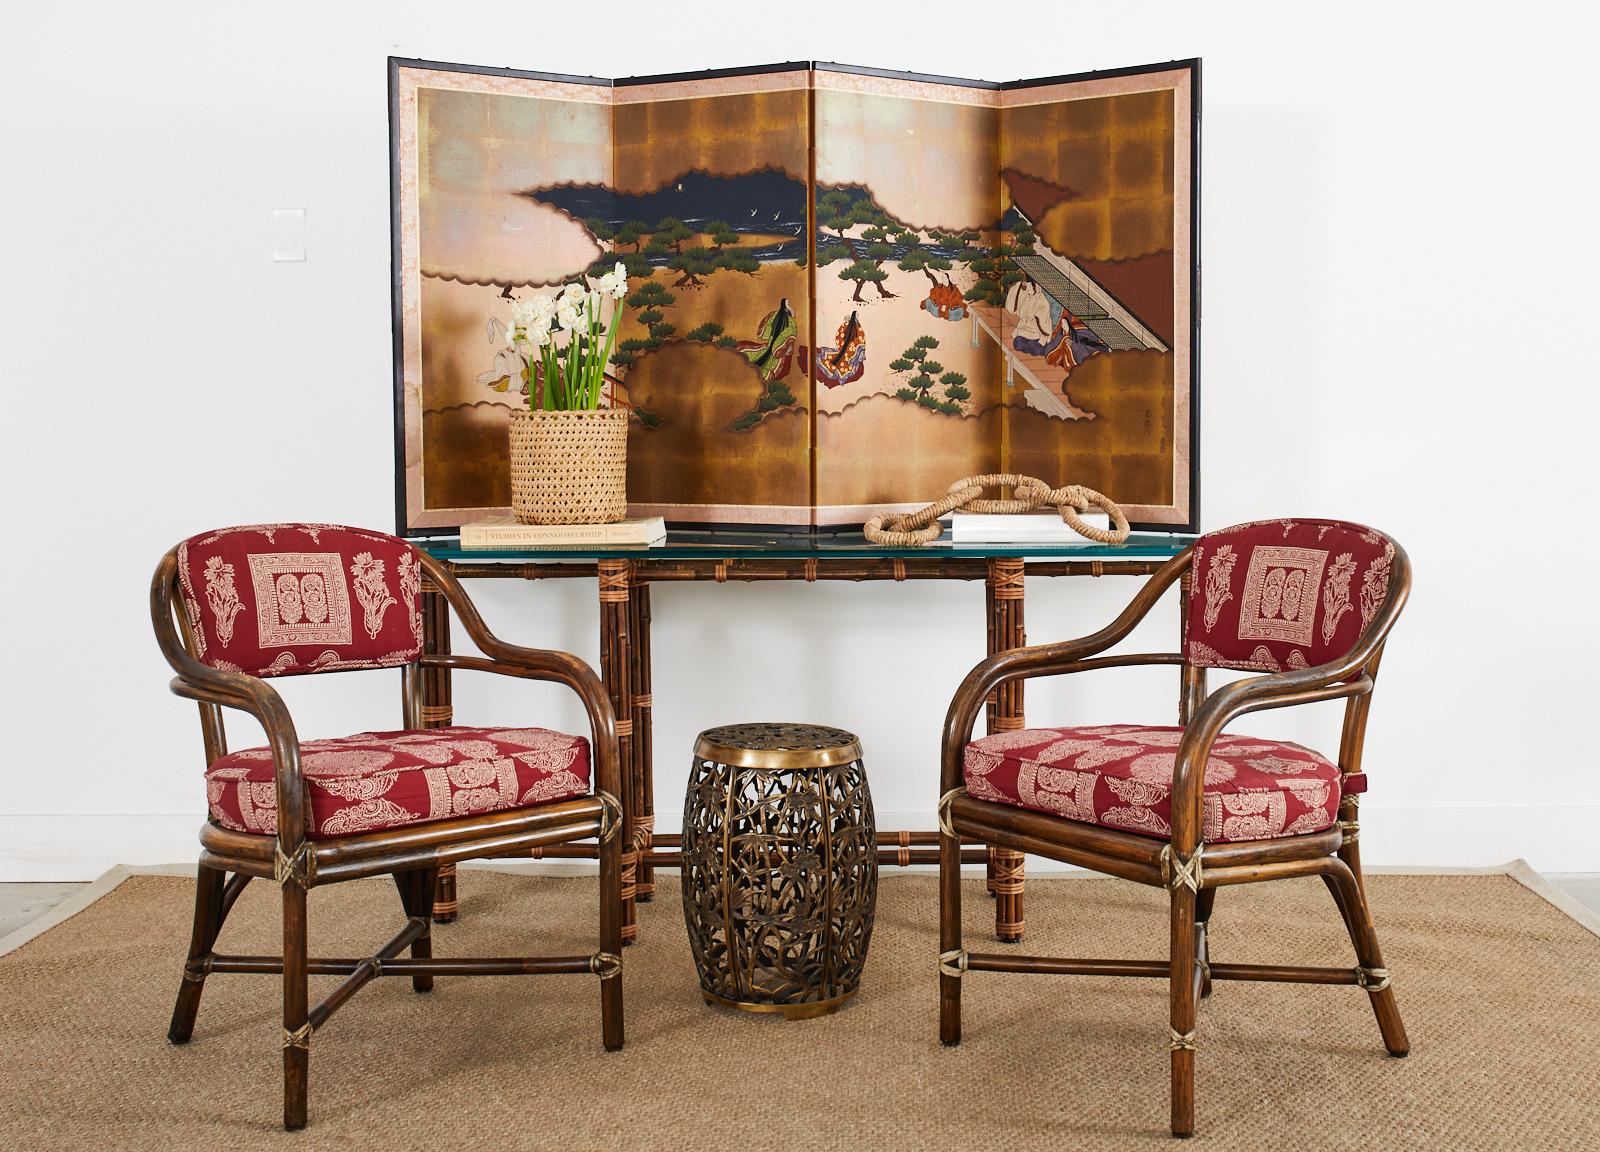 Organic modern pair of rattan armchairs by McGuire featuring an exotic Rajasthan style upholstery fabric with paisley floral motifs over a crimson ground. Crafted from bent rattan the sinuous frames have gracefully curved arms and a caned back. The